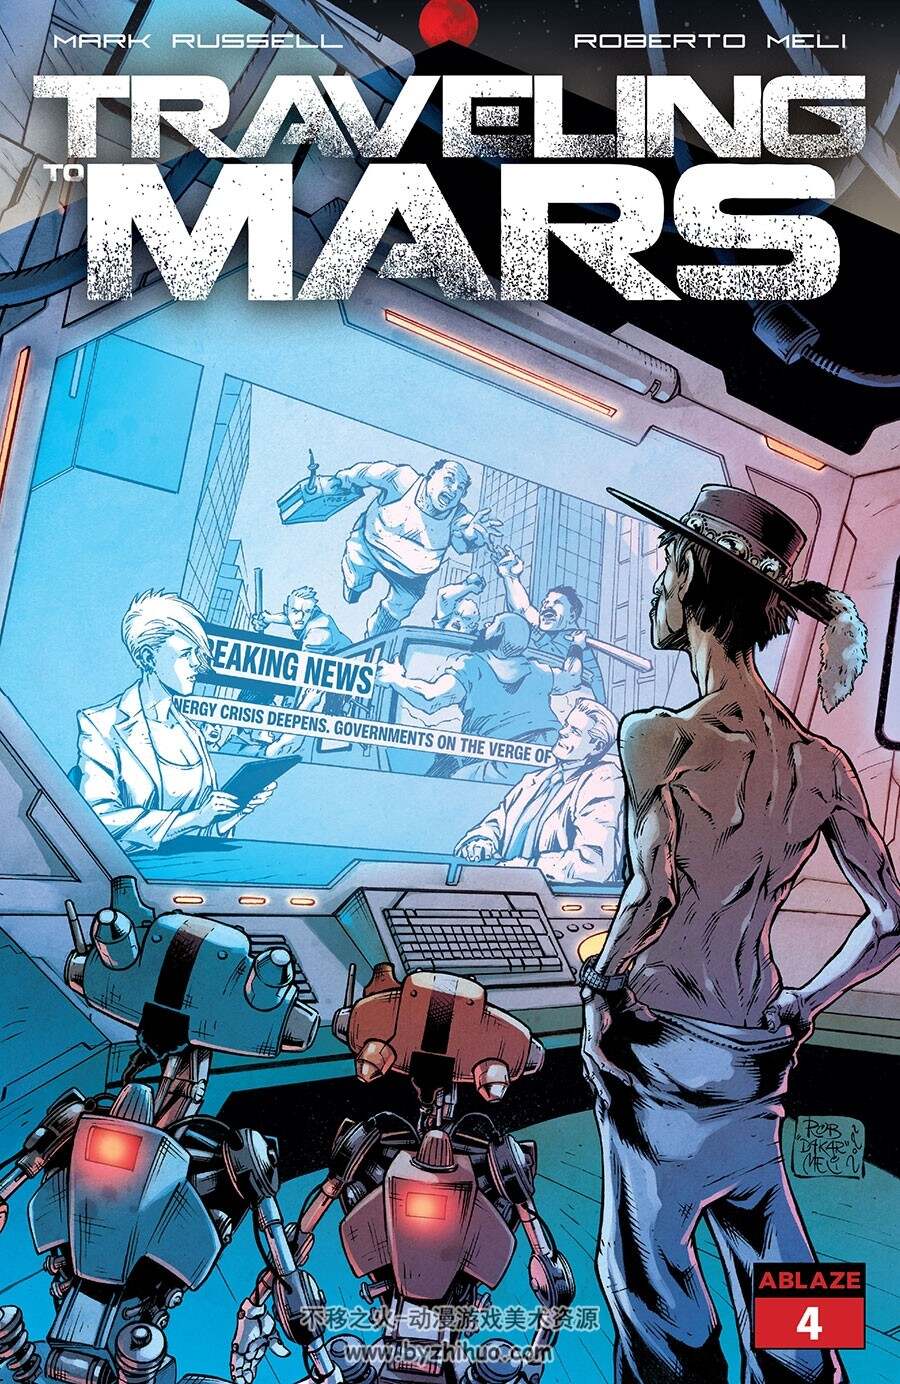 Traveling to Mars 第4册 Mark Russell 漫画下载